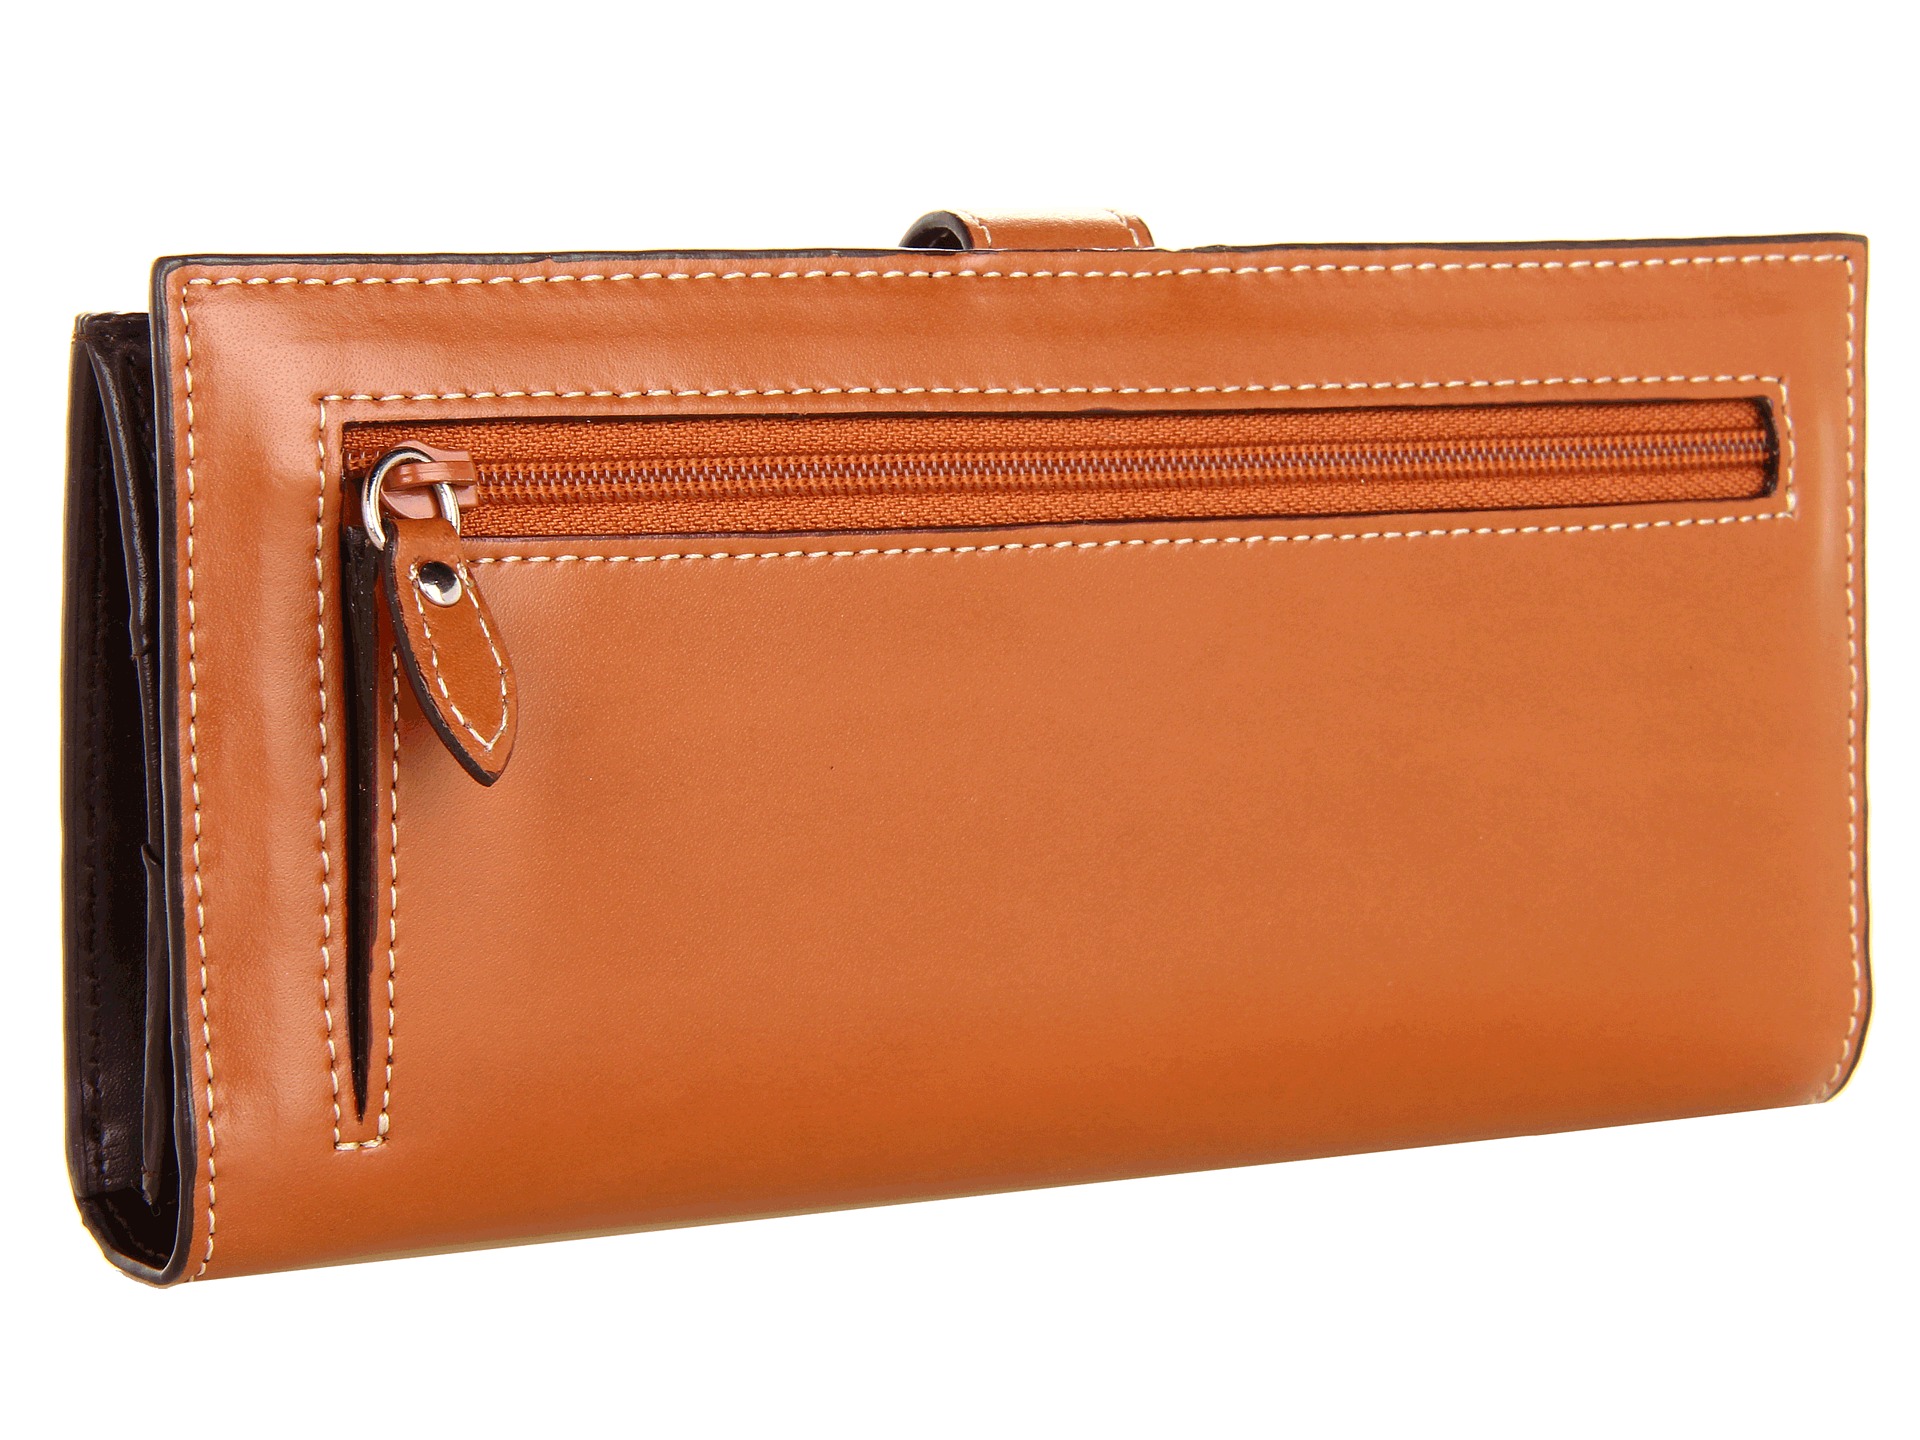 Lodis Accessories Audrey Clutch Wallet With F3 | Shipped Free at Zappos